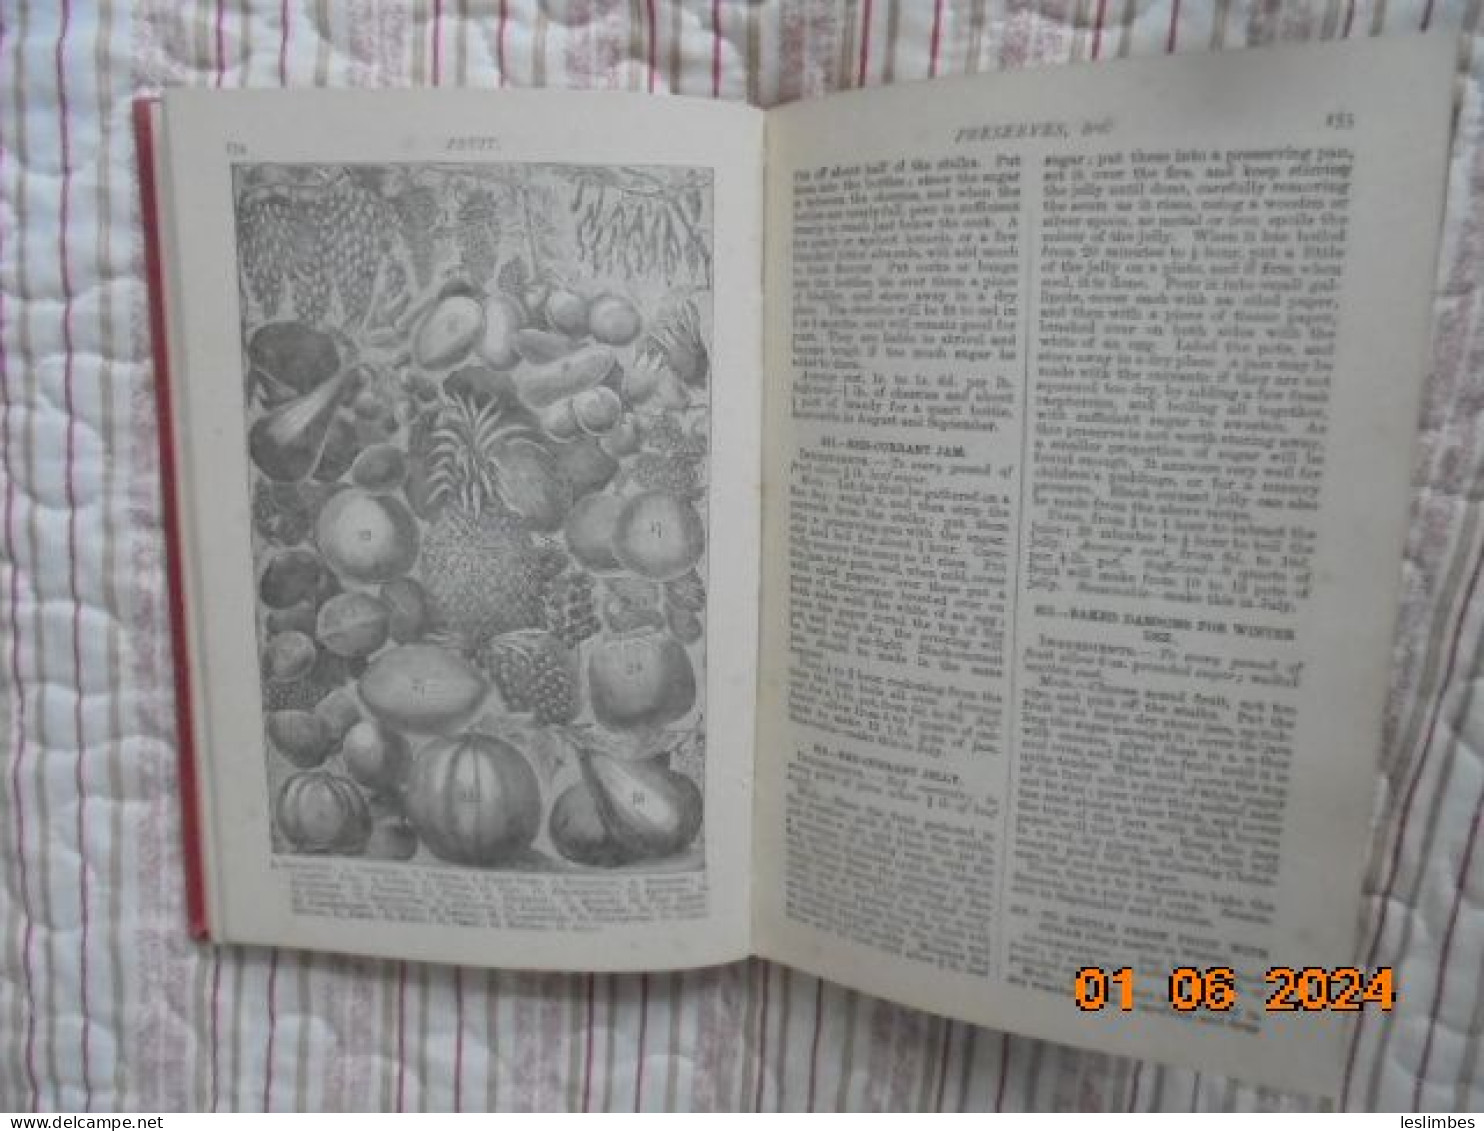 Mrs Beeton's Cookery Book and Household Guide. 1898 New & enlarged edition. 516 columns, 1000 receipts and instructions